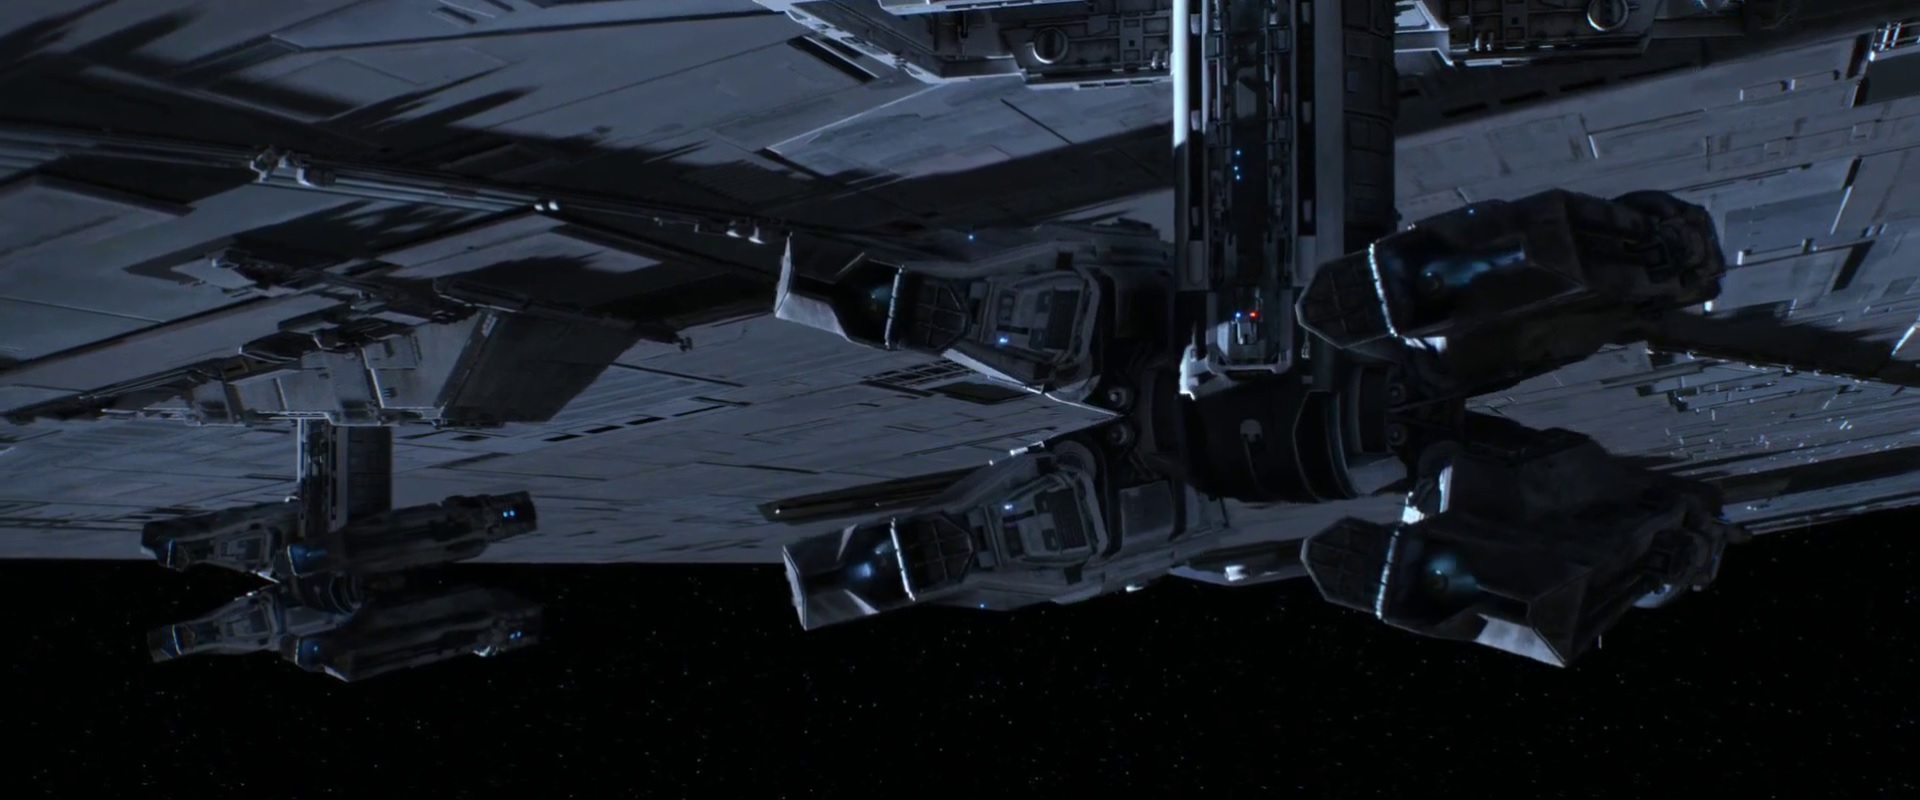 Image Finalizer ventral cannons jpg Wookieepedia 